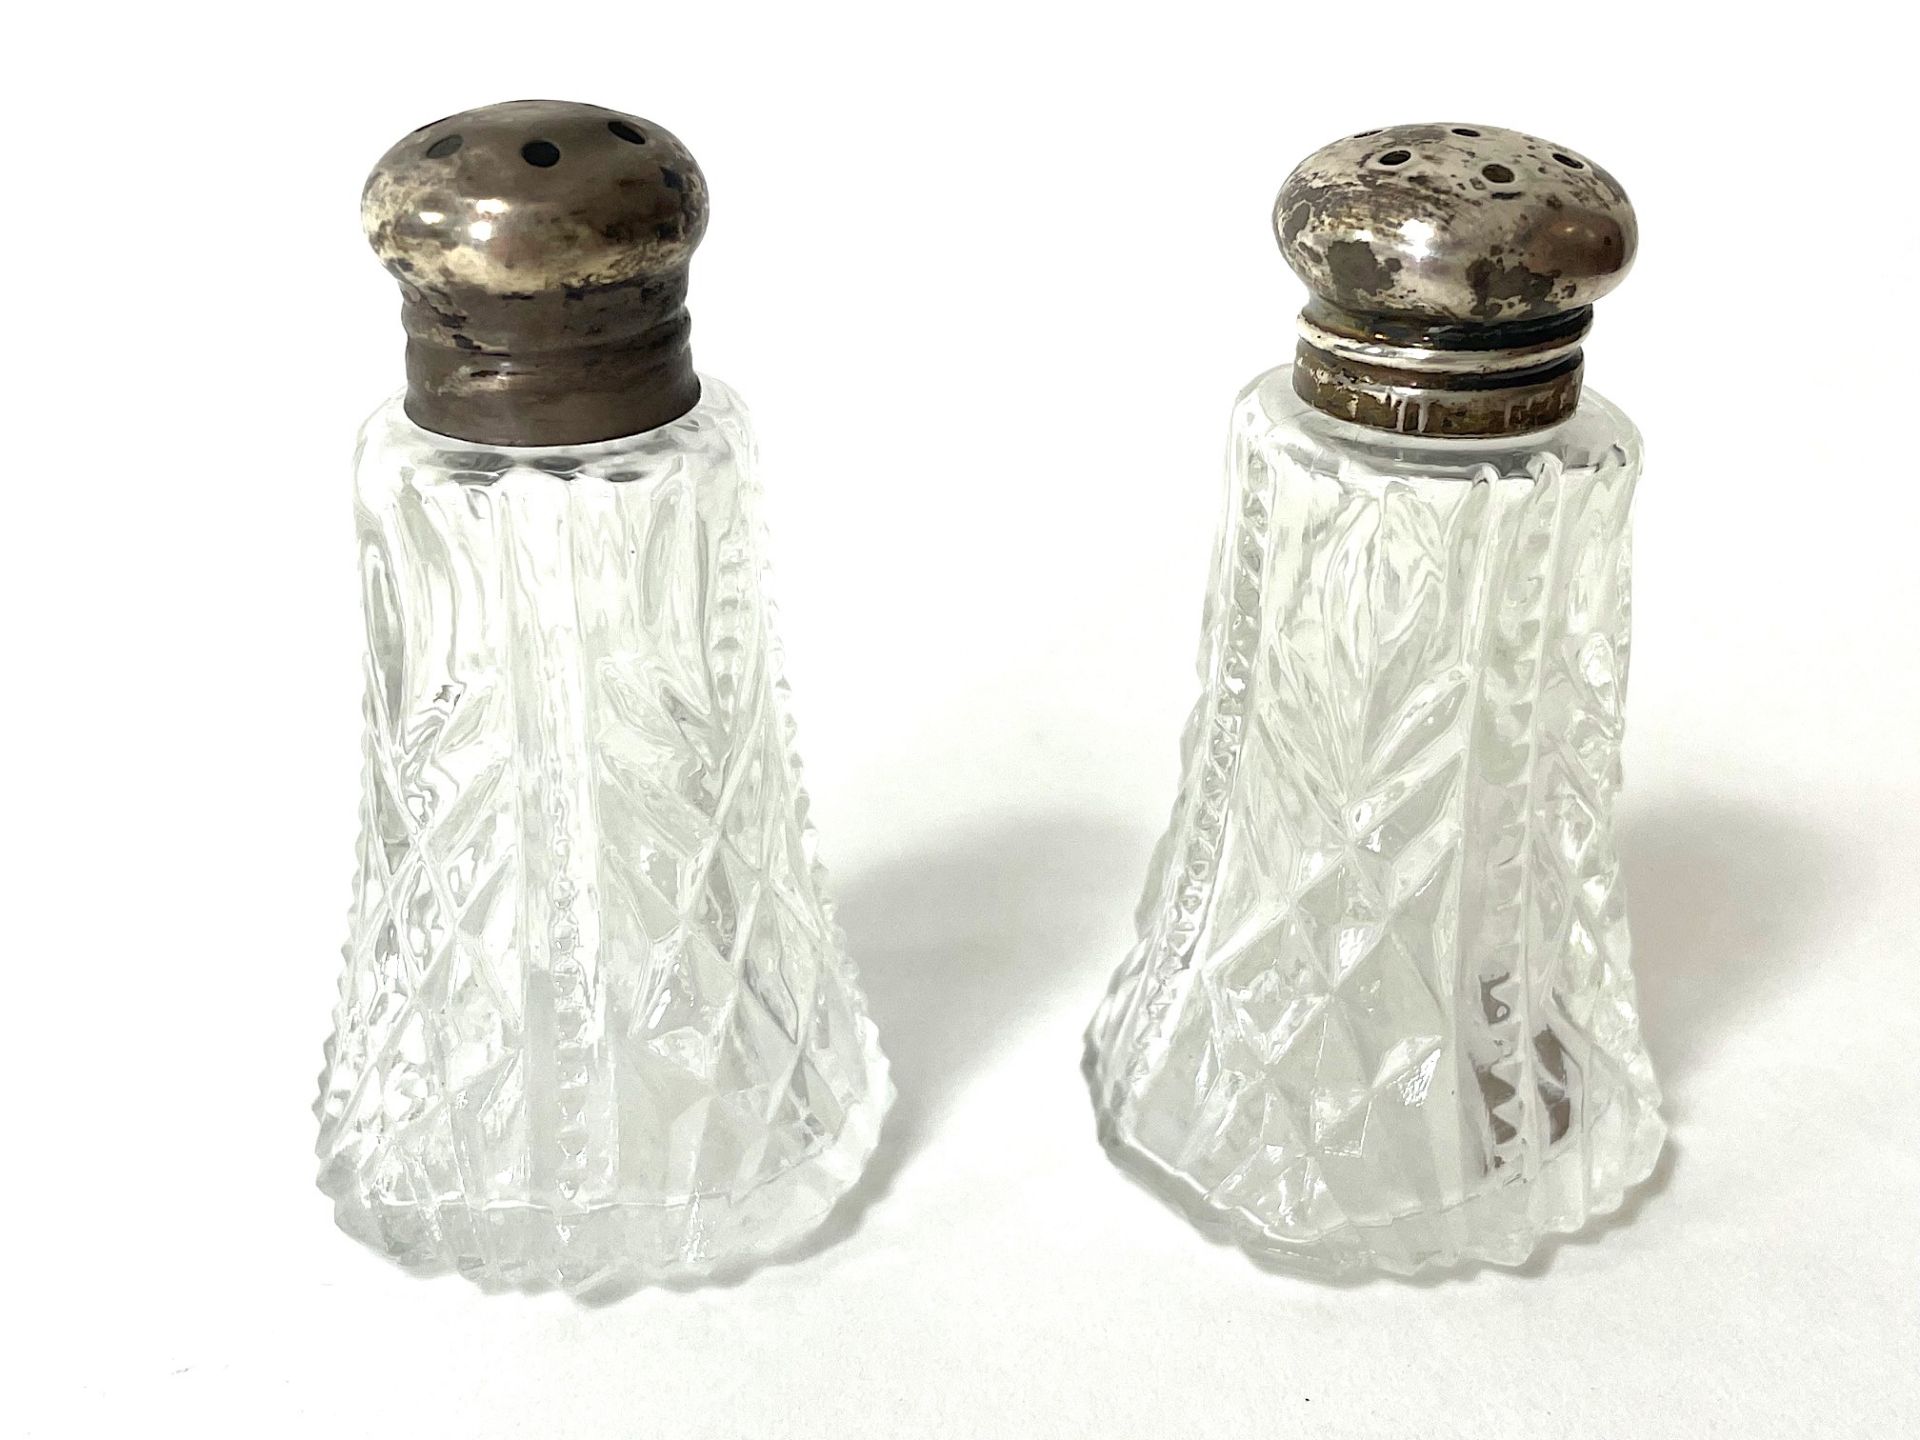 40 pairs of salt/pepper and spice shakers, - Image 41 of 88